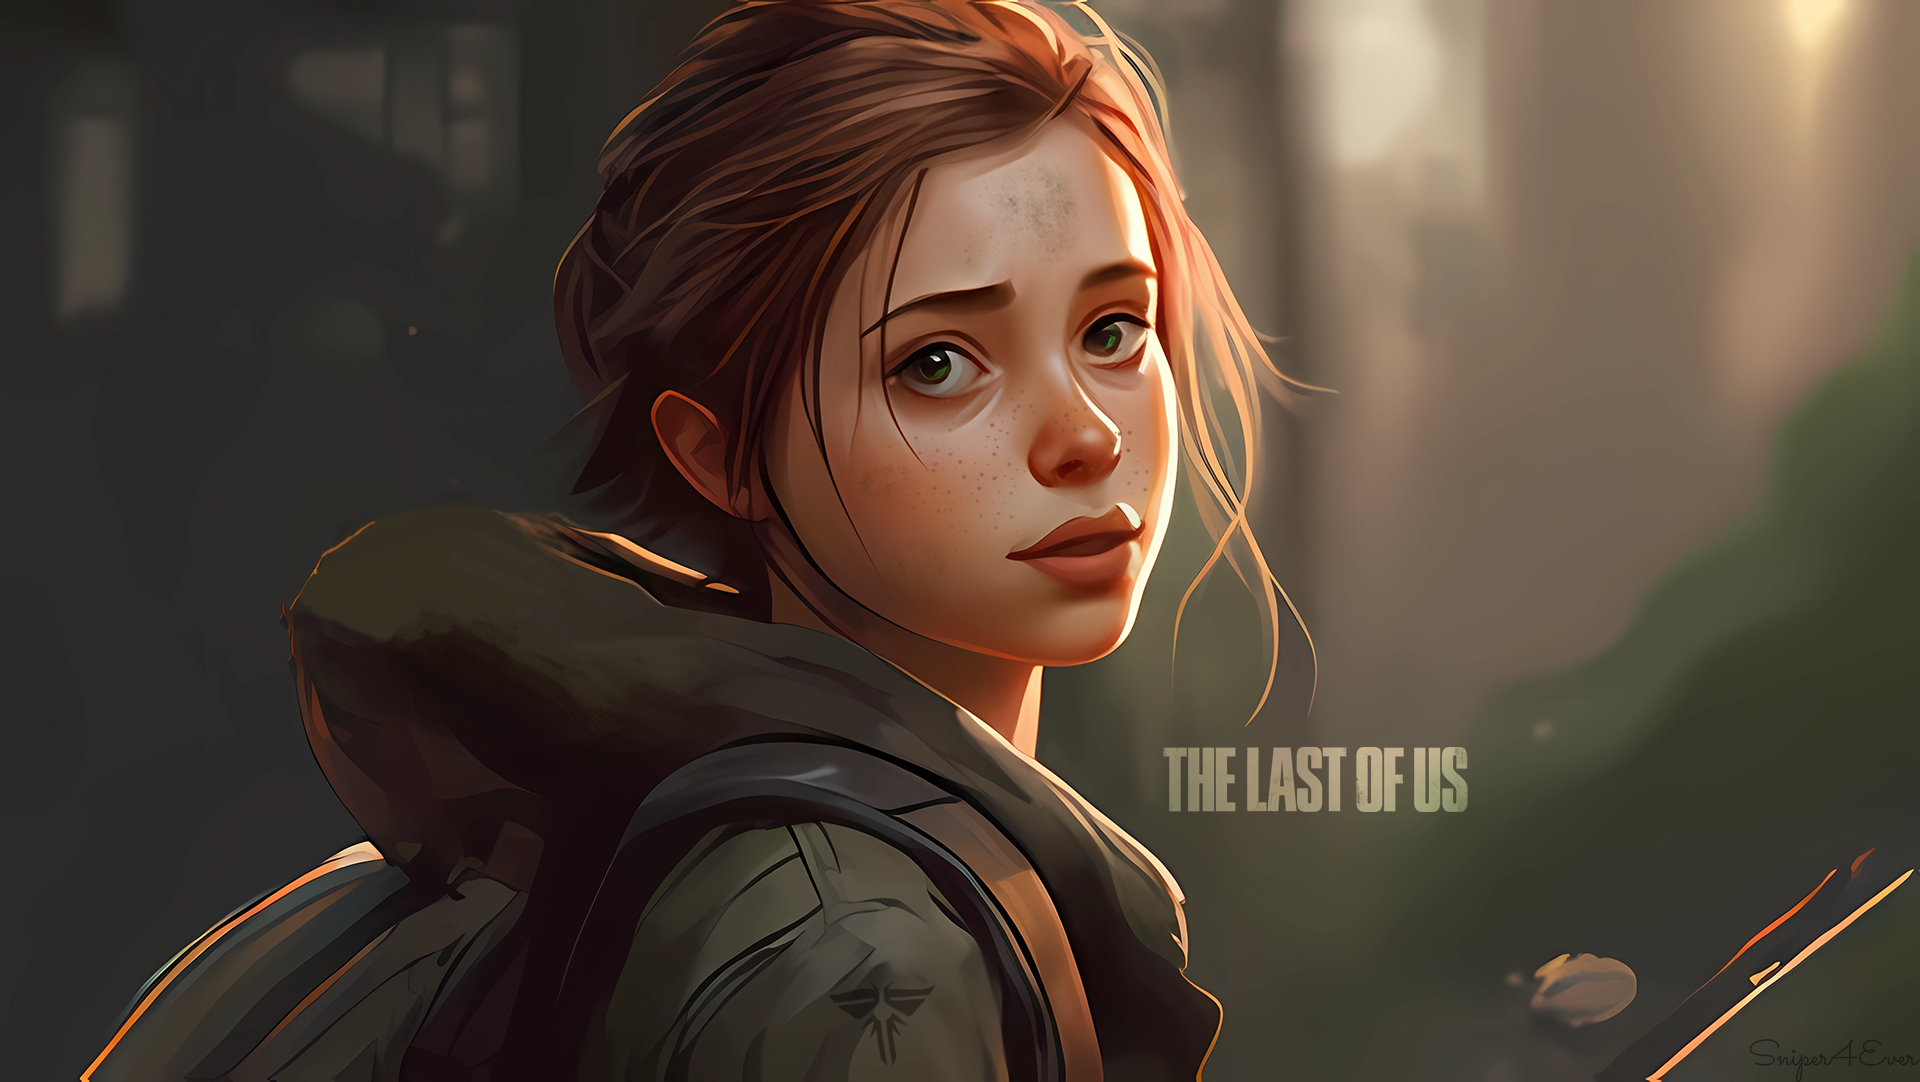 Ellie - The Last of Us - Drawing by Sniper4Ever